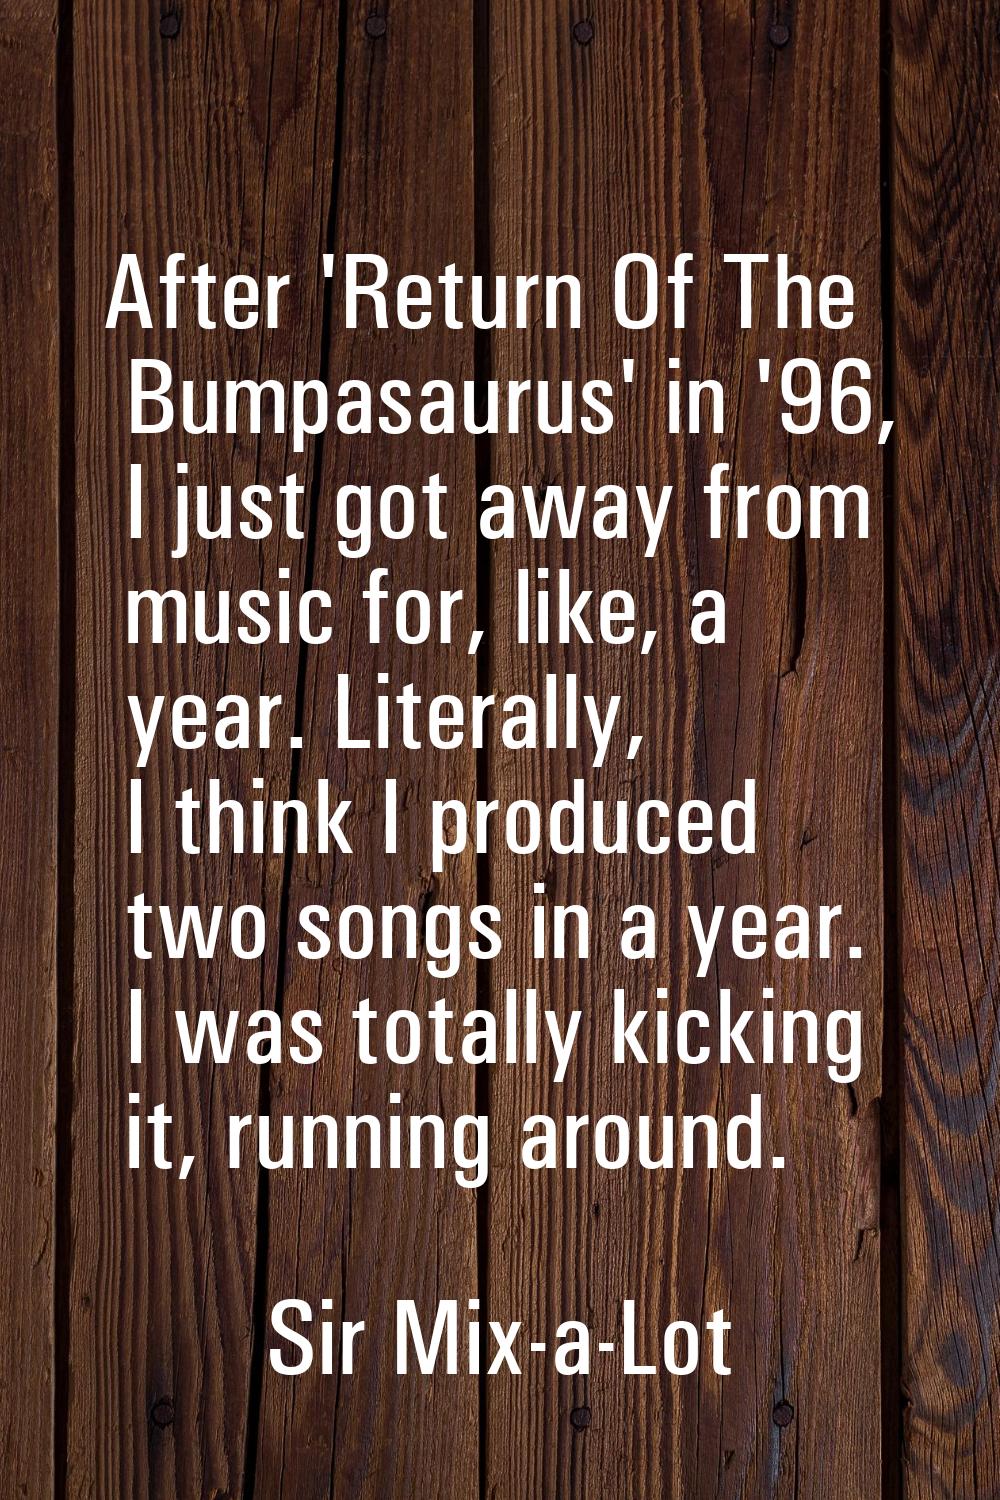 After 'Return Of The Bumpasaurus' in '96, I just got away from music for, like, a year. Literally, 